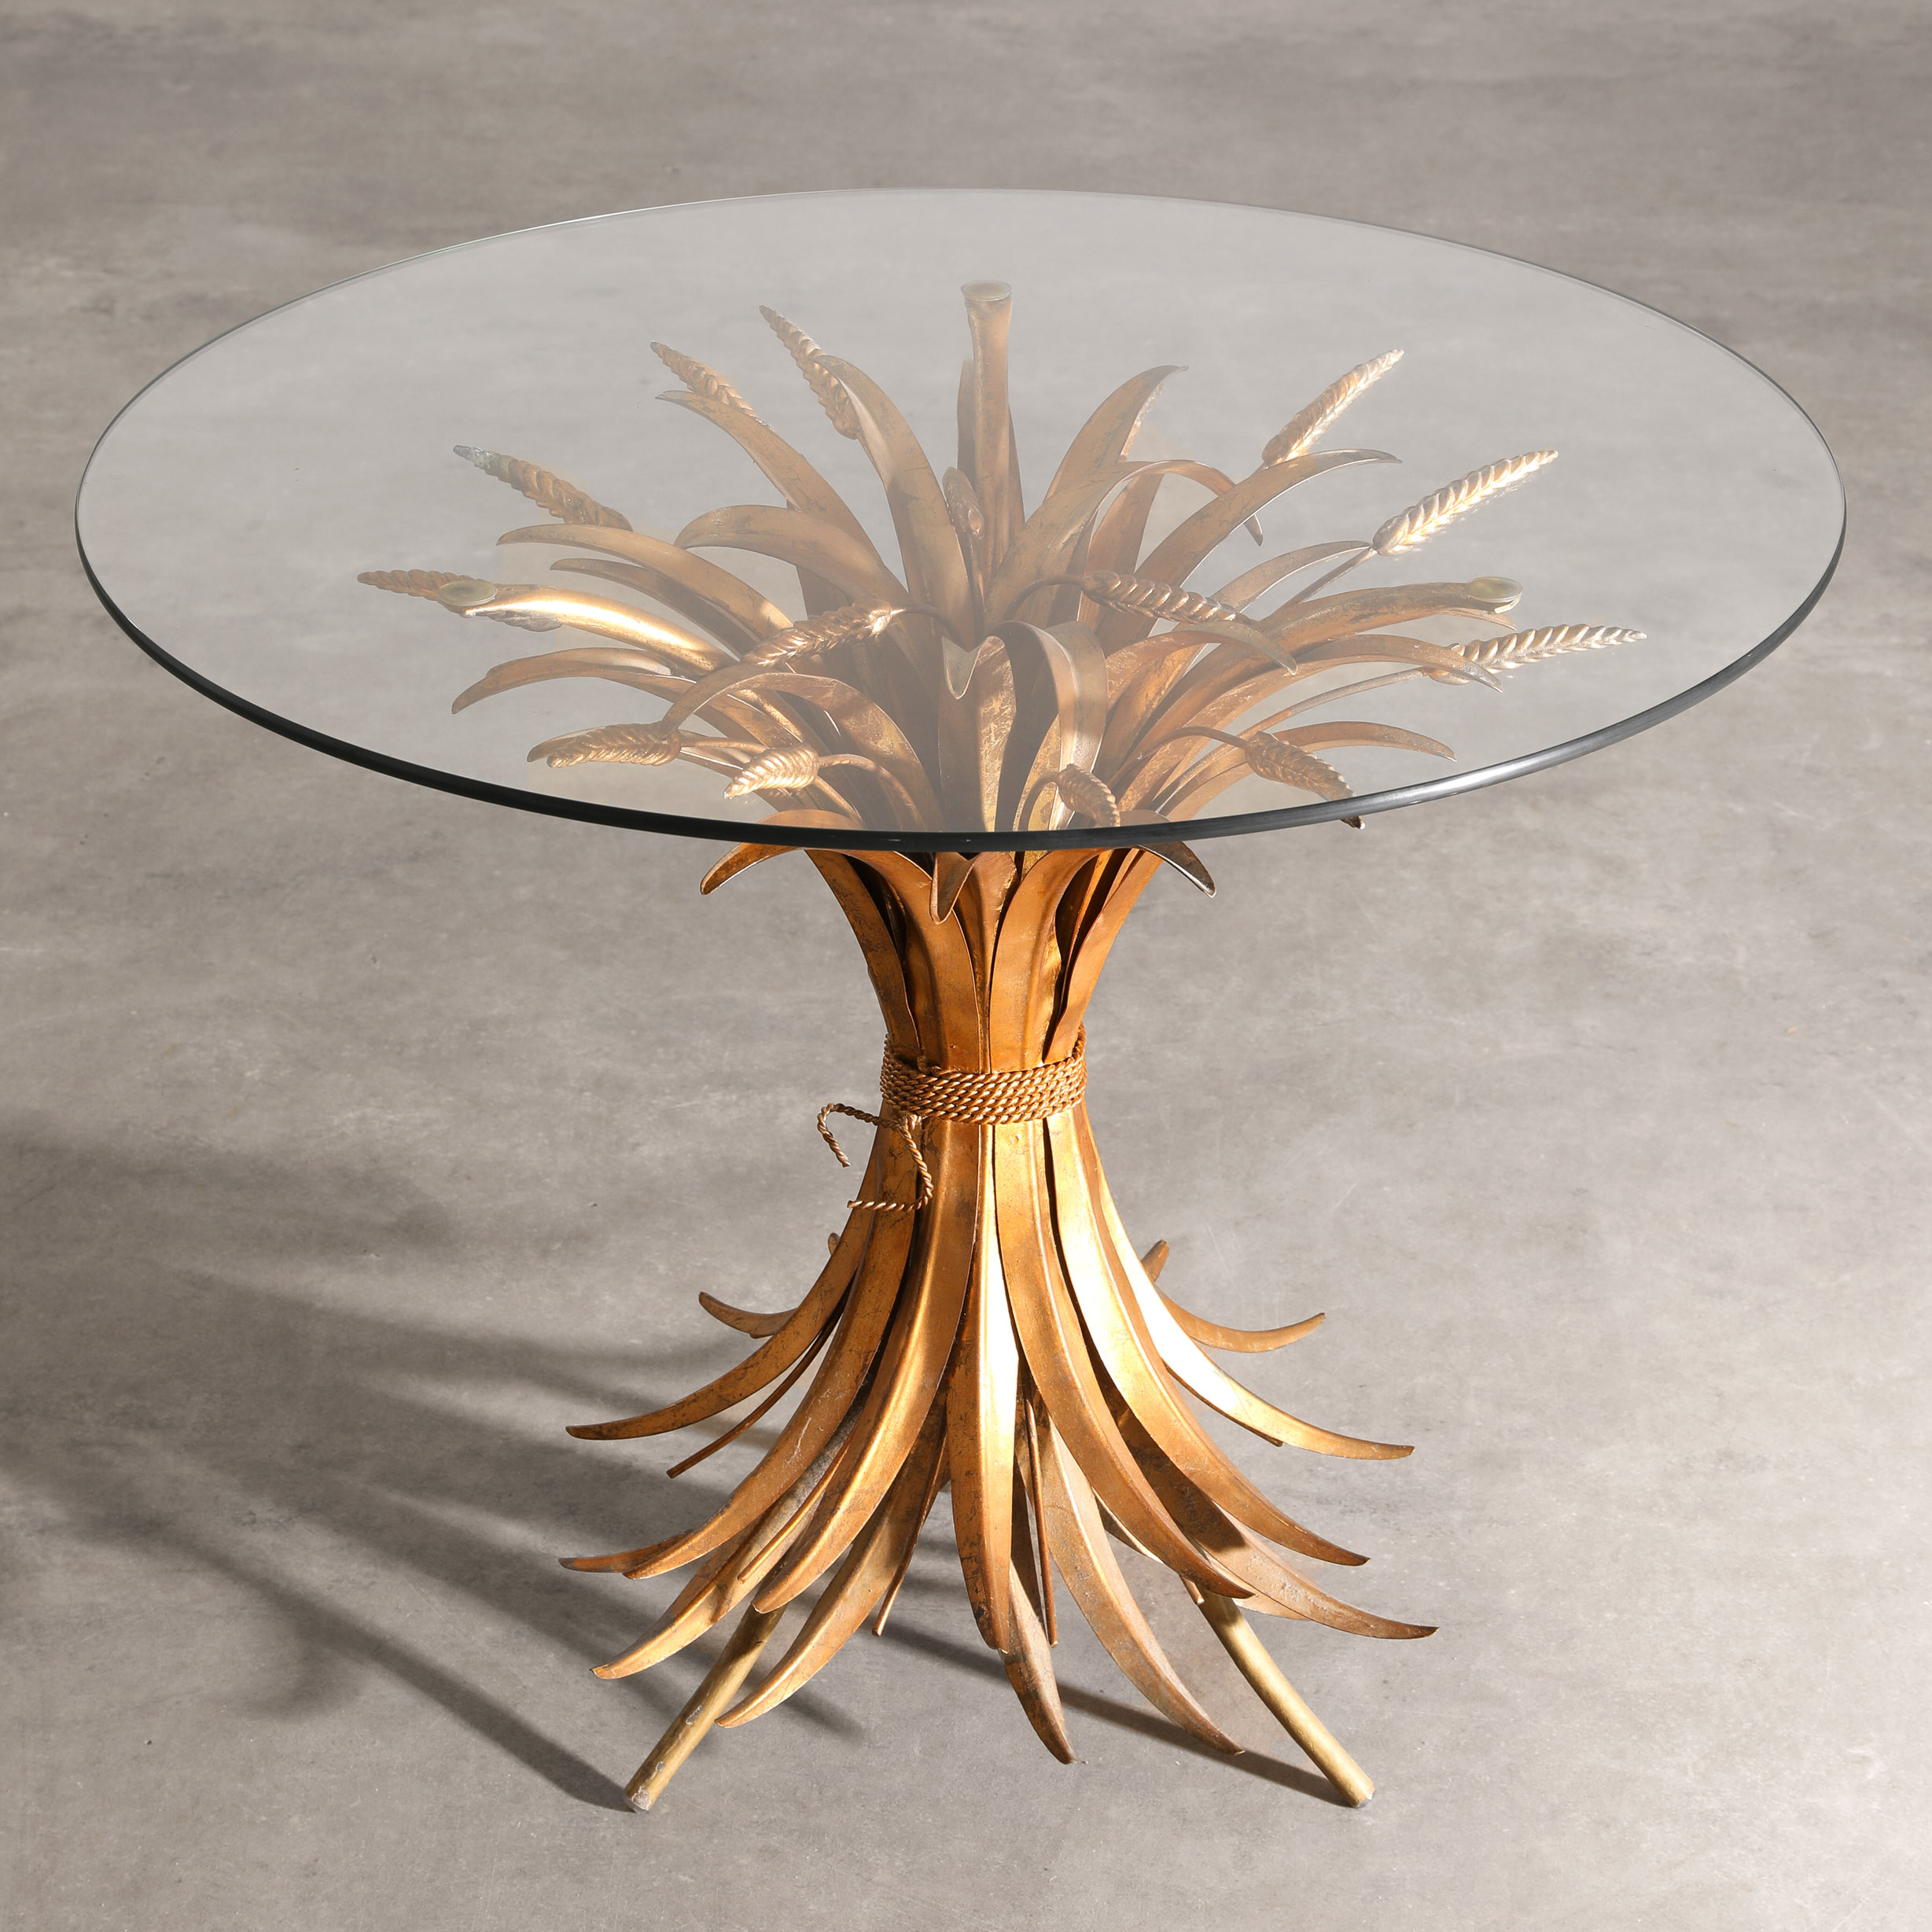 Coco Chanel Sheaf of Wheat Coffee Table - Image 2 of 4